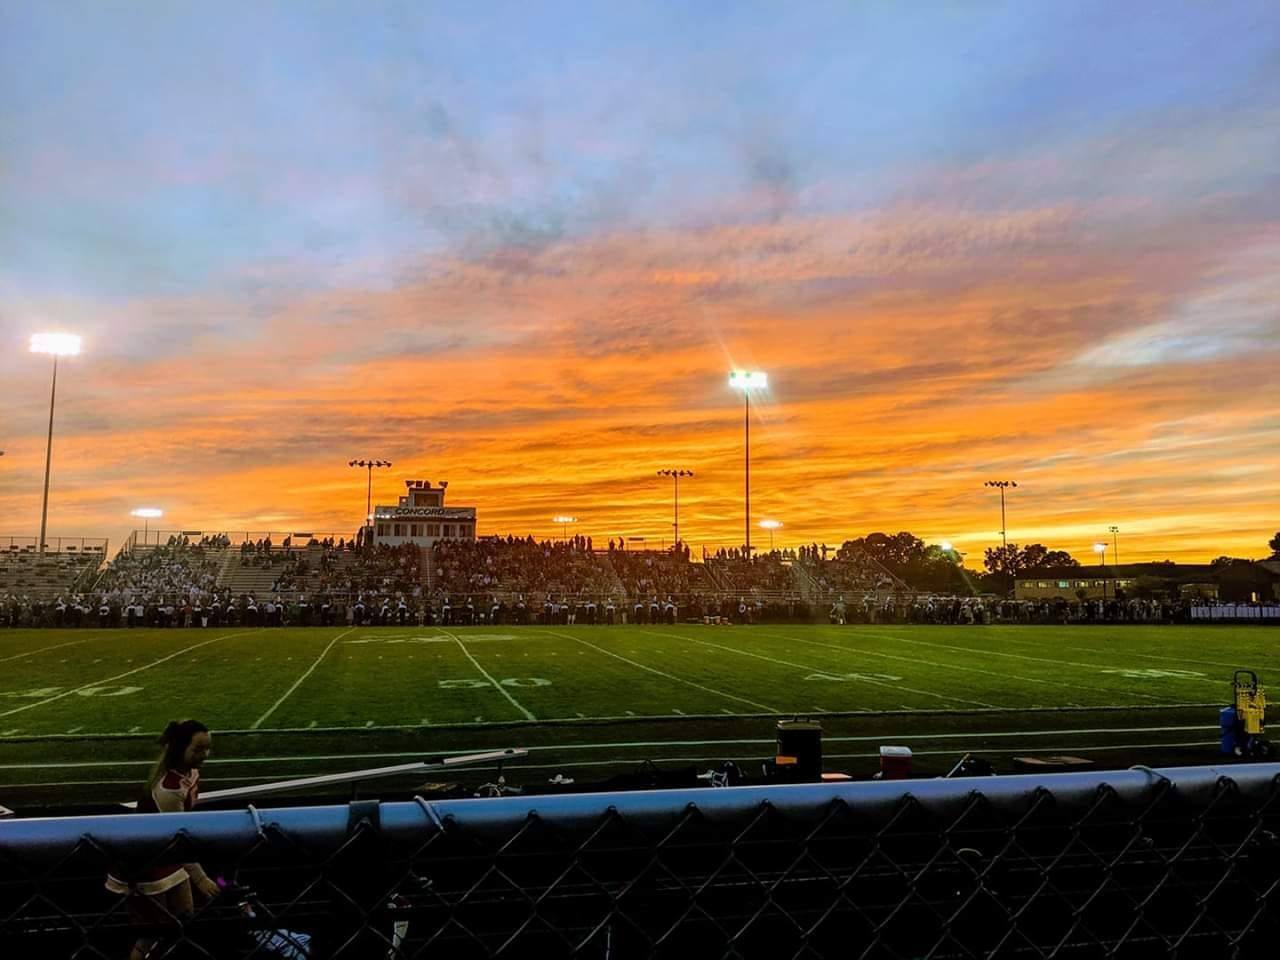 Sunrise over an athletic field